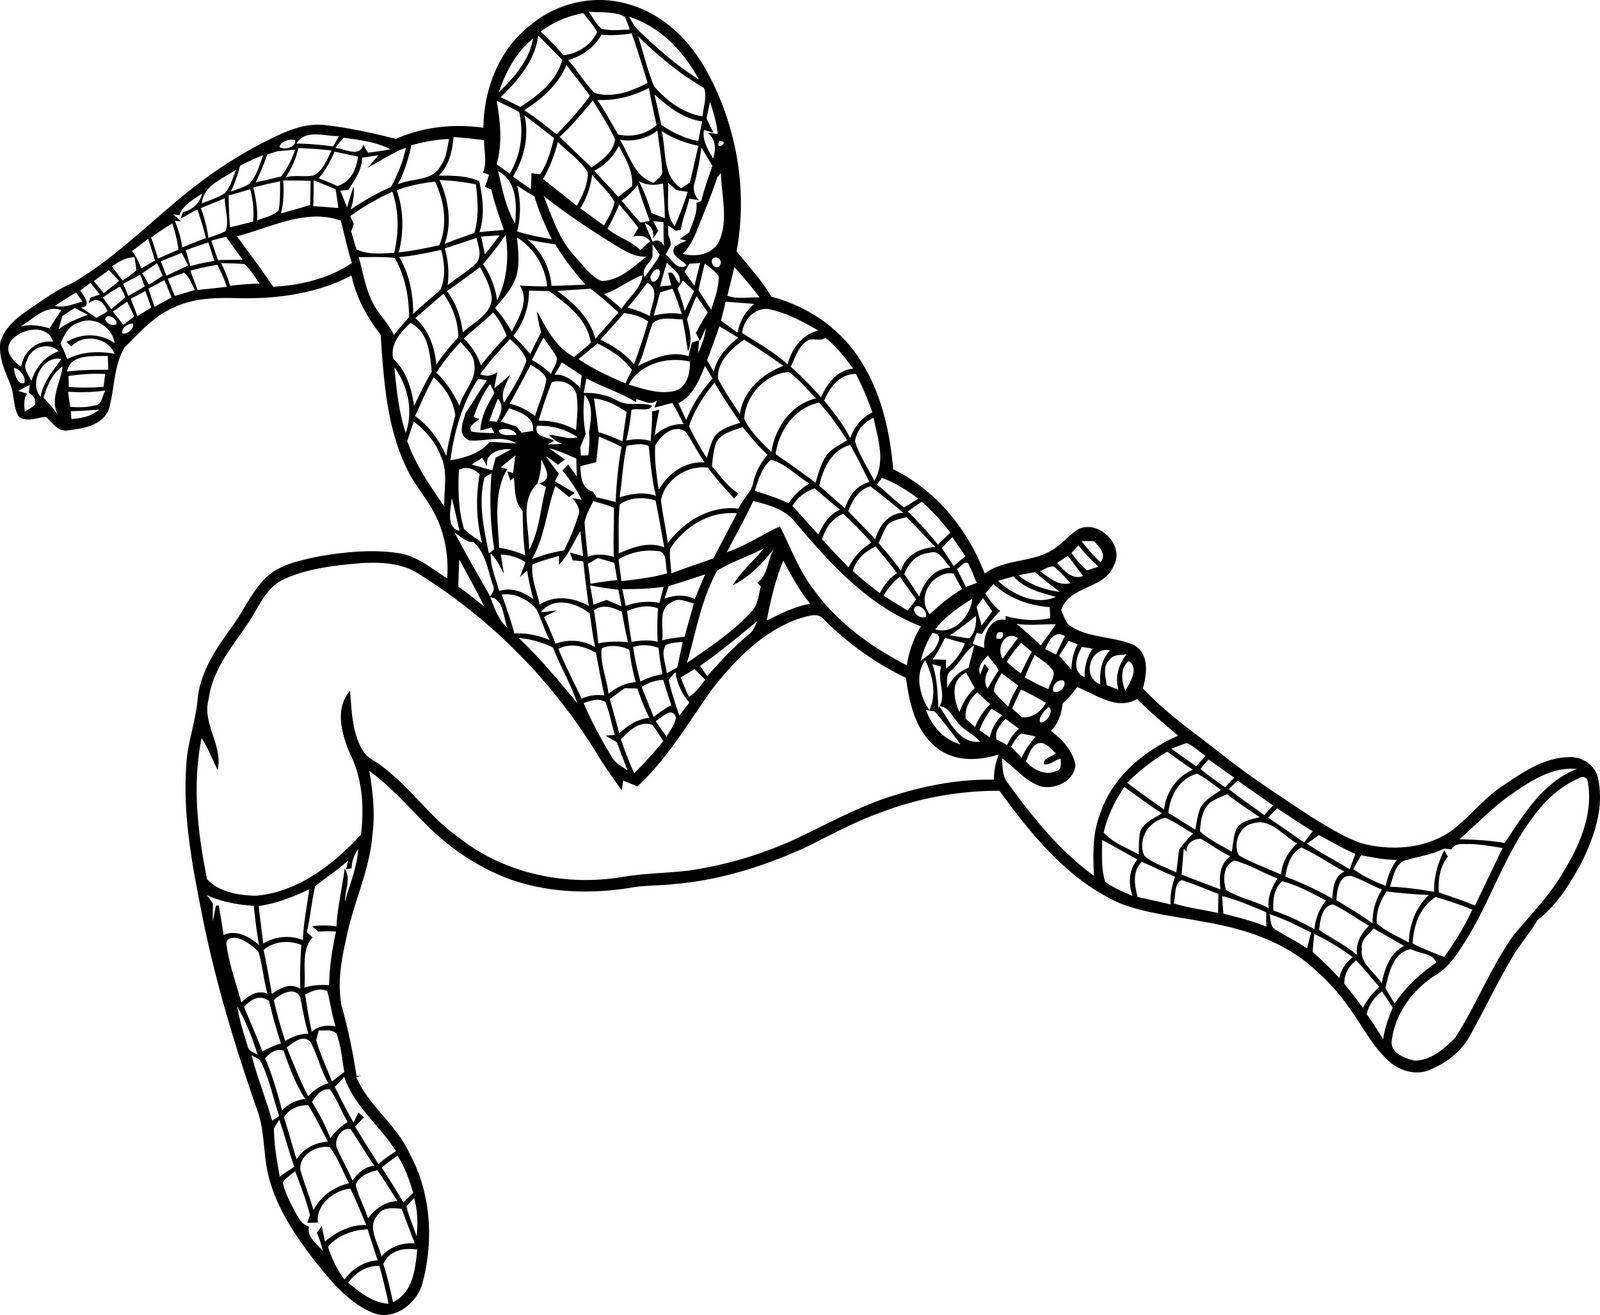 Coloring pages free printable spiderman coloring pages for kids